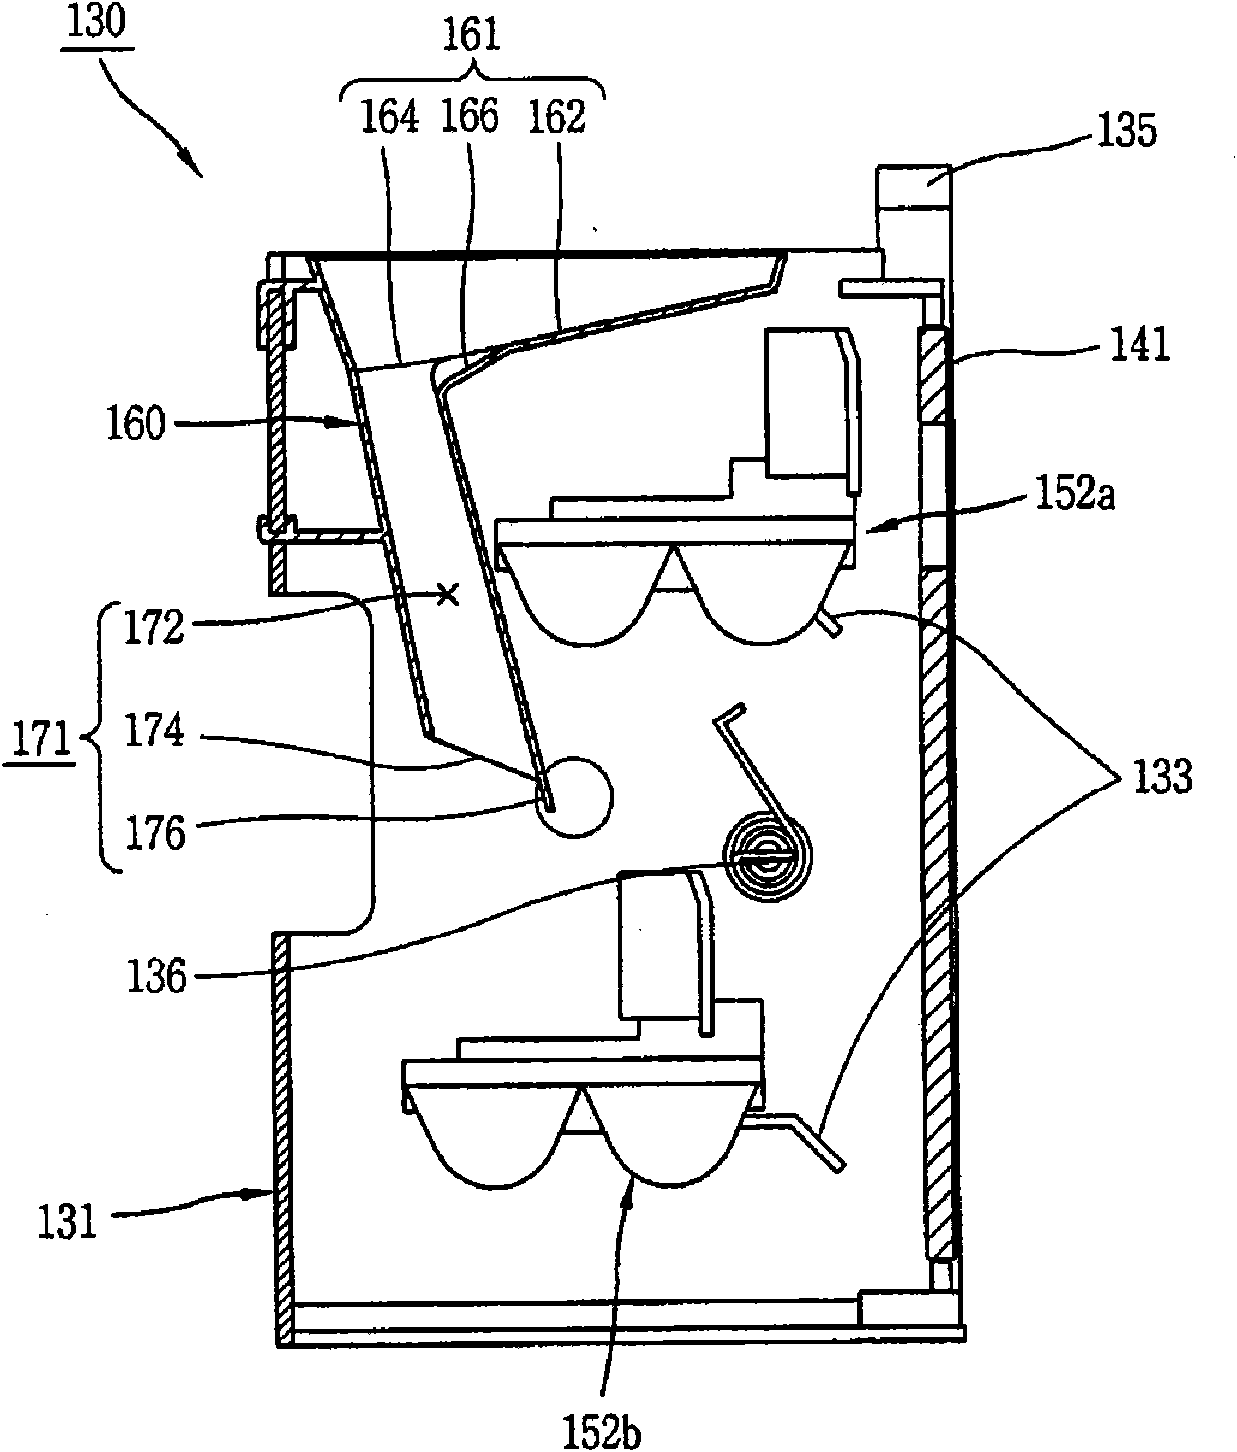 Water funnel and ice maker for refrigerator having the same